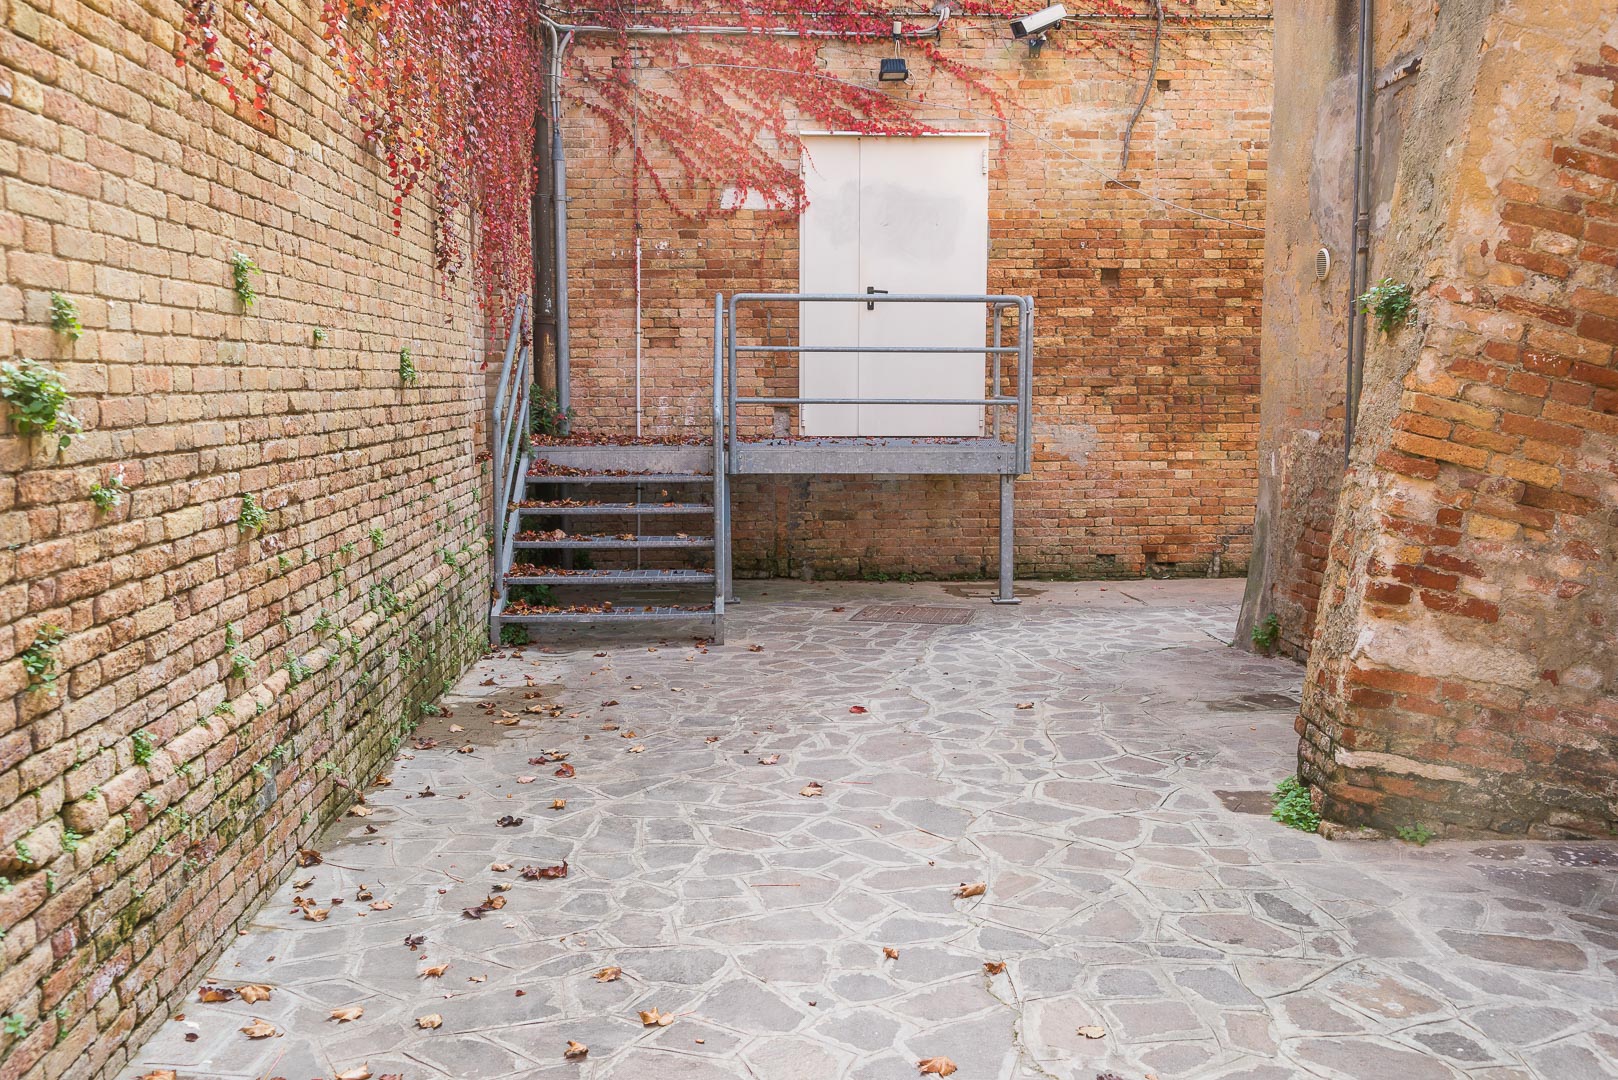 Backplate • ID: 9815 • HDRI Haven - Street With Brick Wall Covered With Leaves